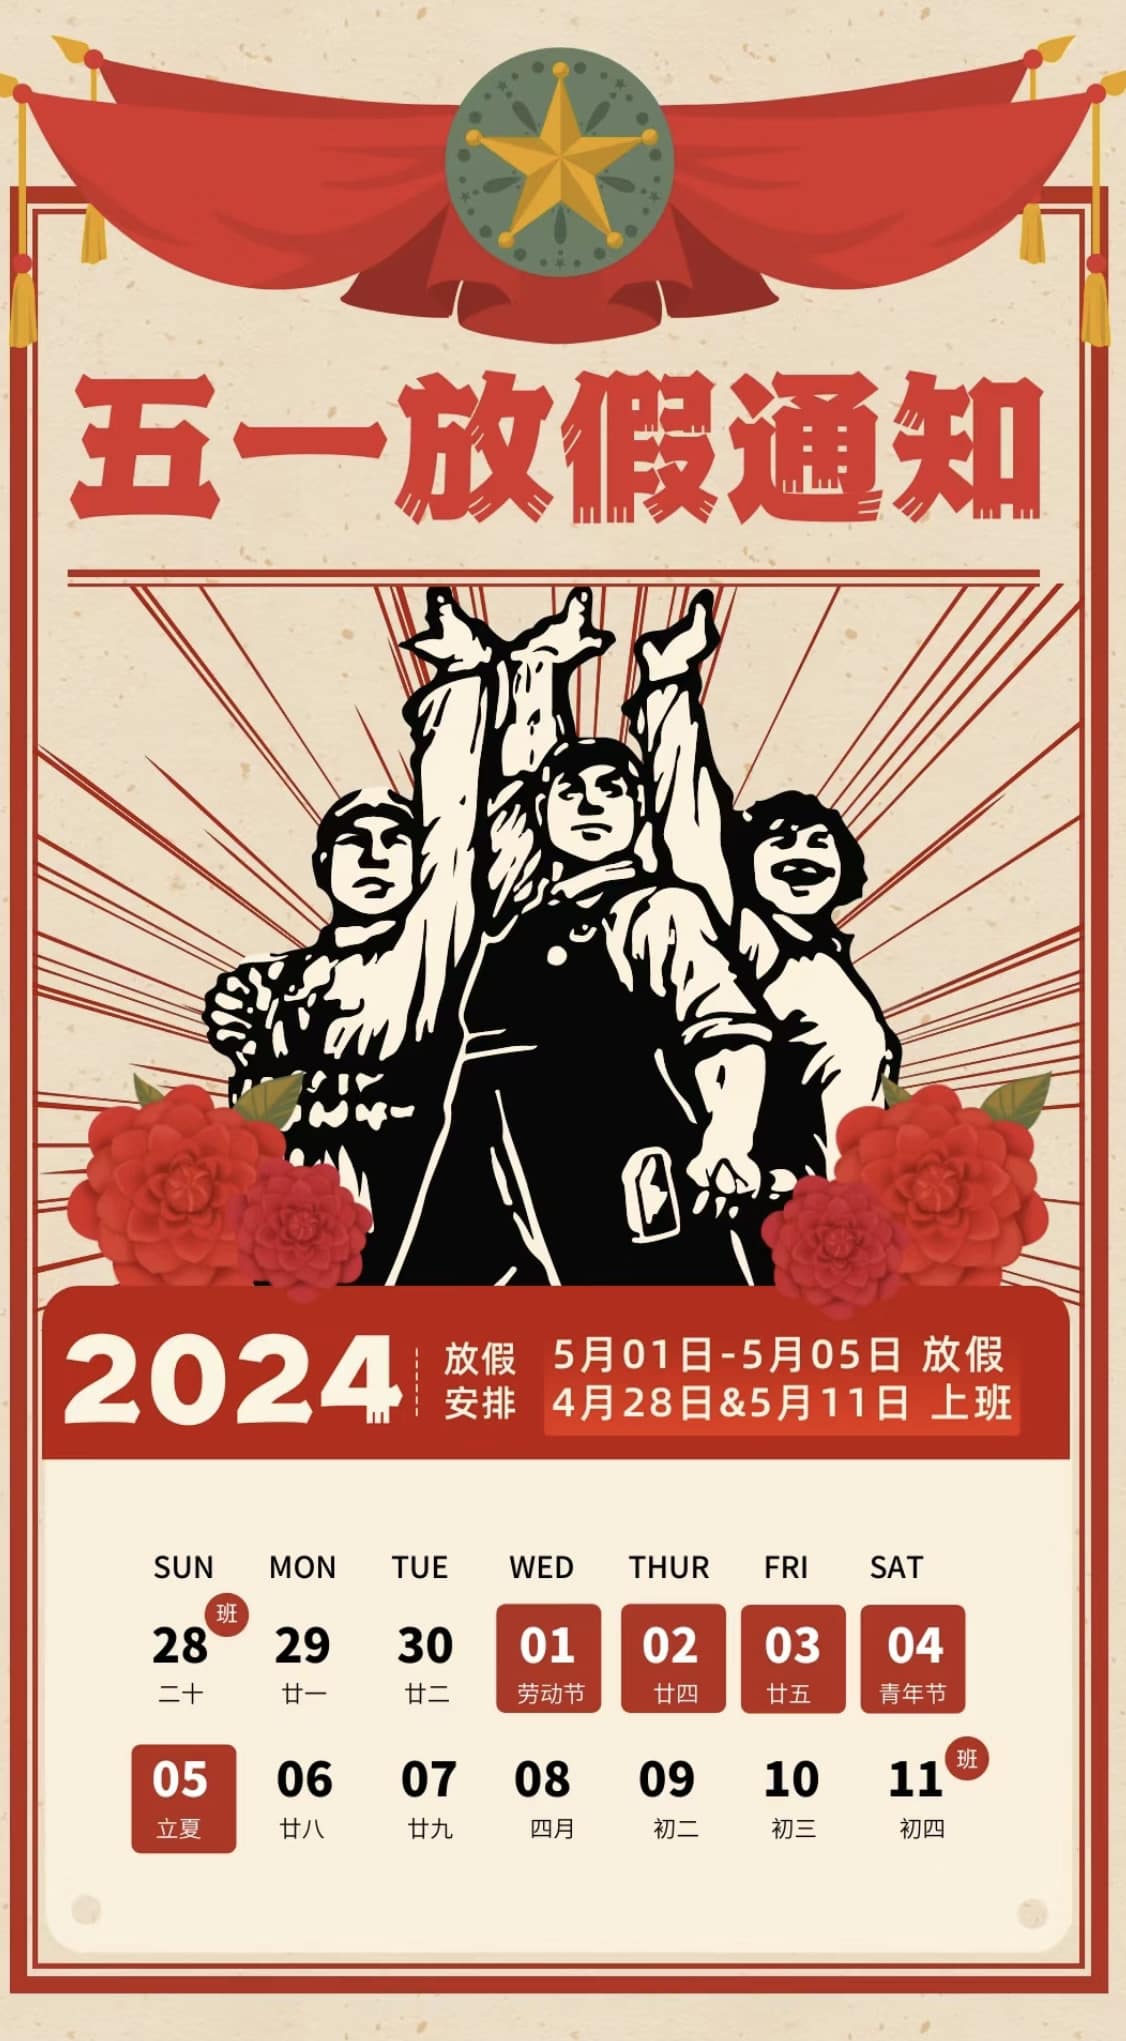 Please note that we are approaching 2024 International Labour Day!